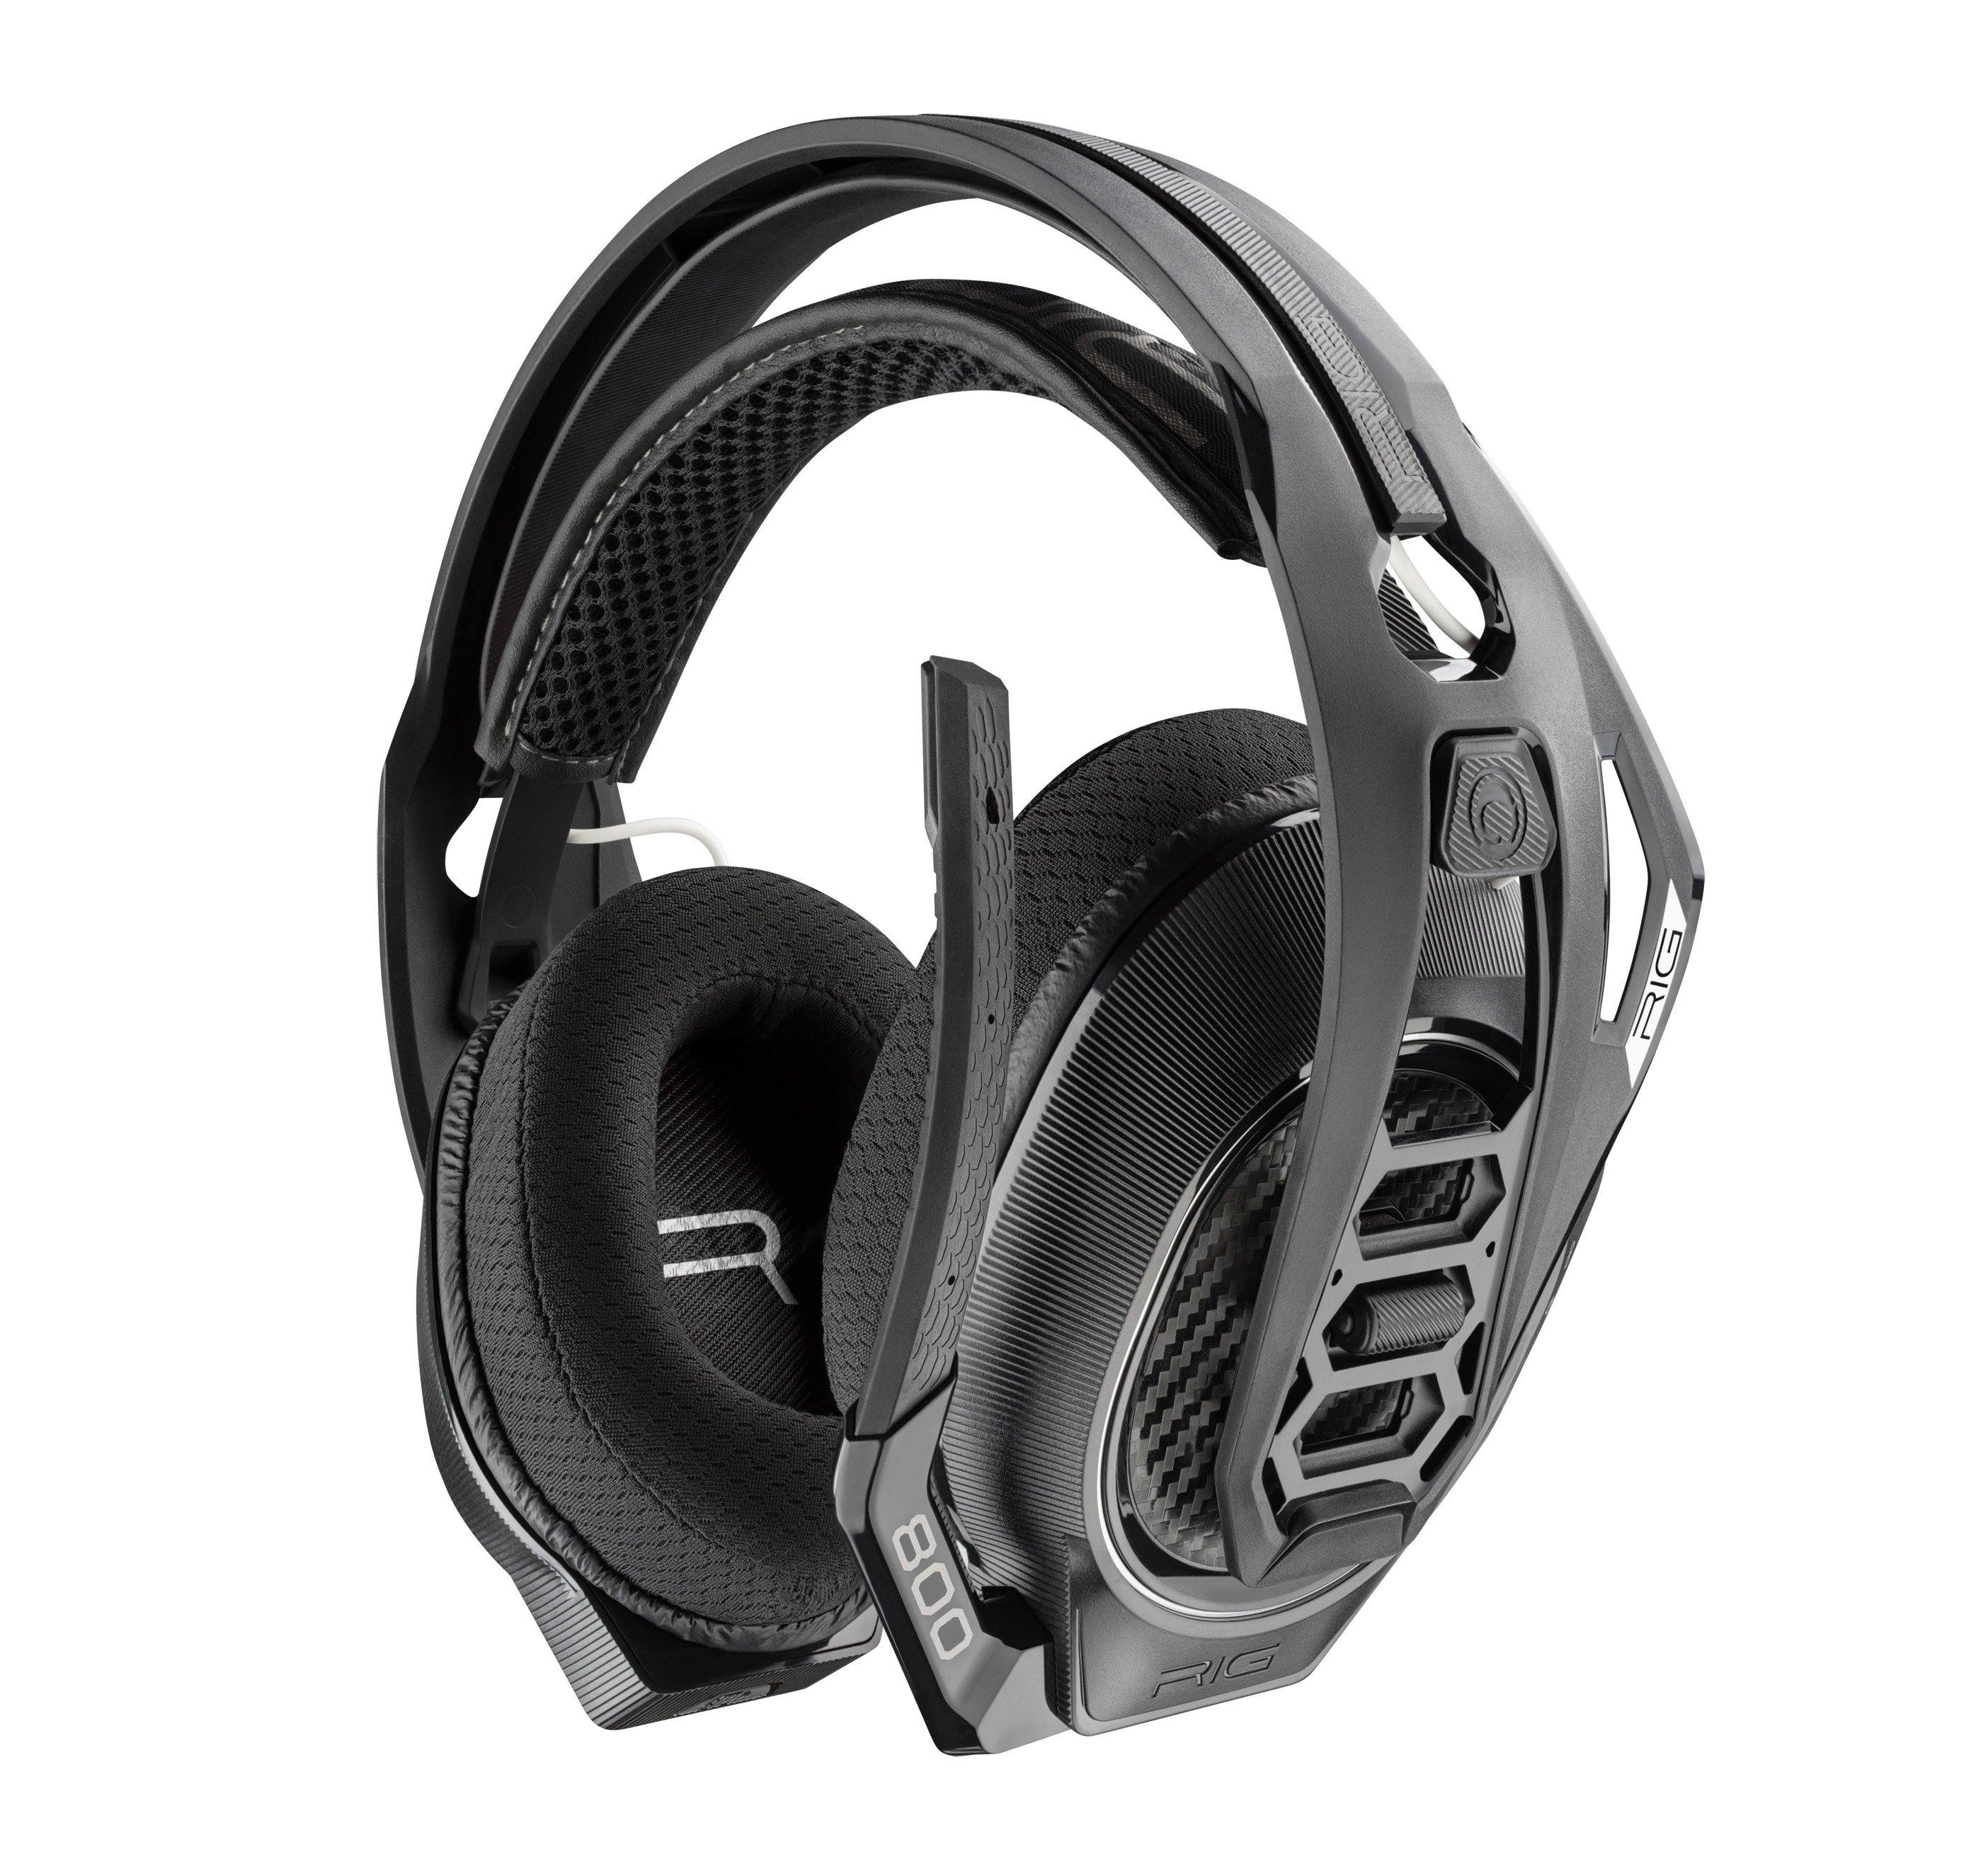 Klant Pessimist Grof RIG 800LX Wireless Gaming Headset for Xbox X/S and Xbox One | GameStop